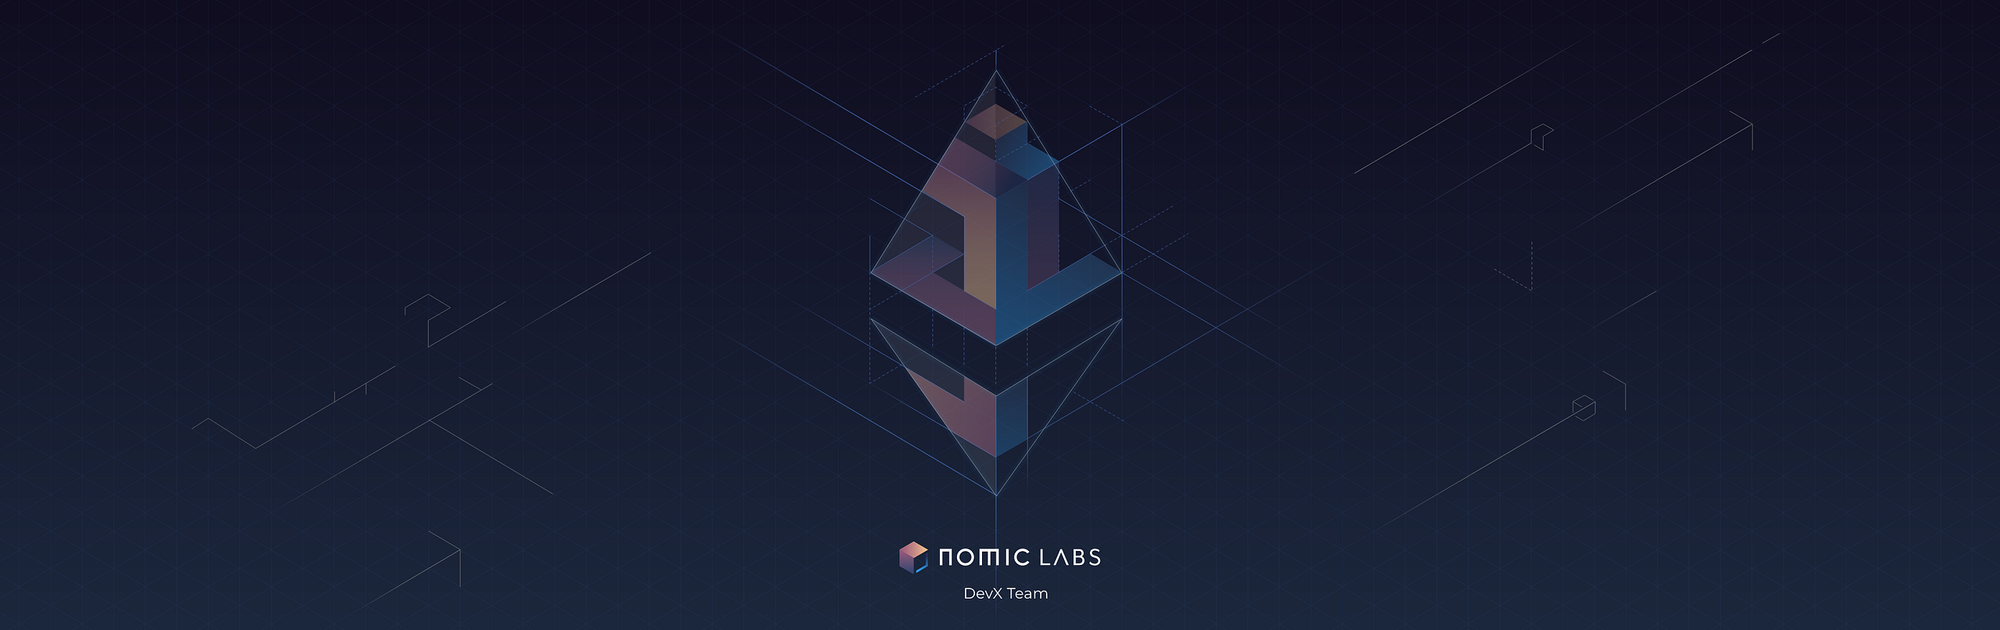 Nomic Labs DevX: 1 year working on Ethereum developer experience